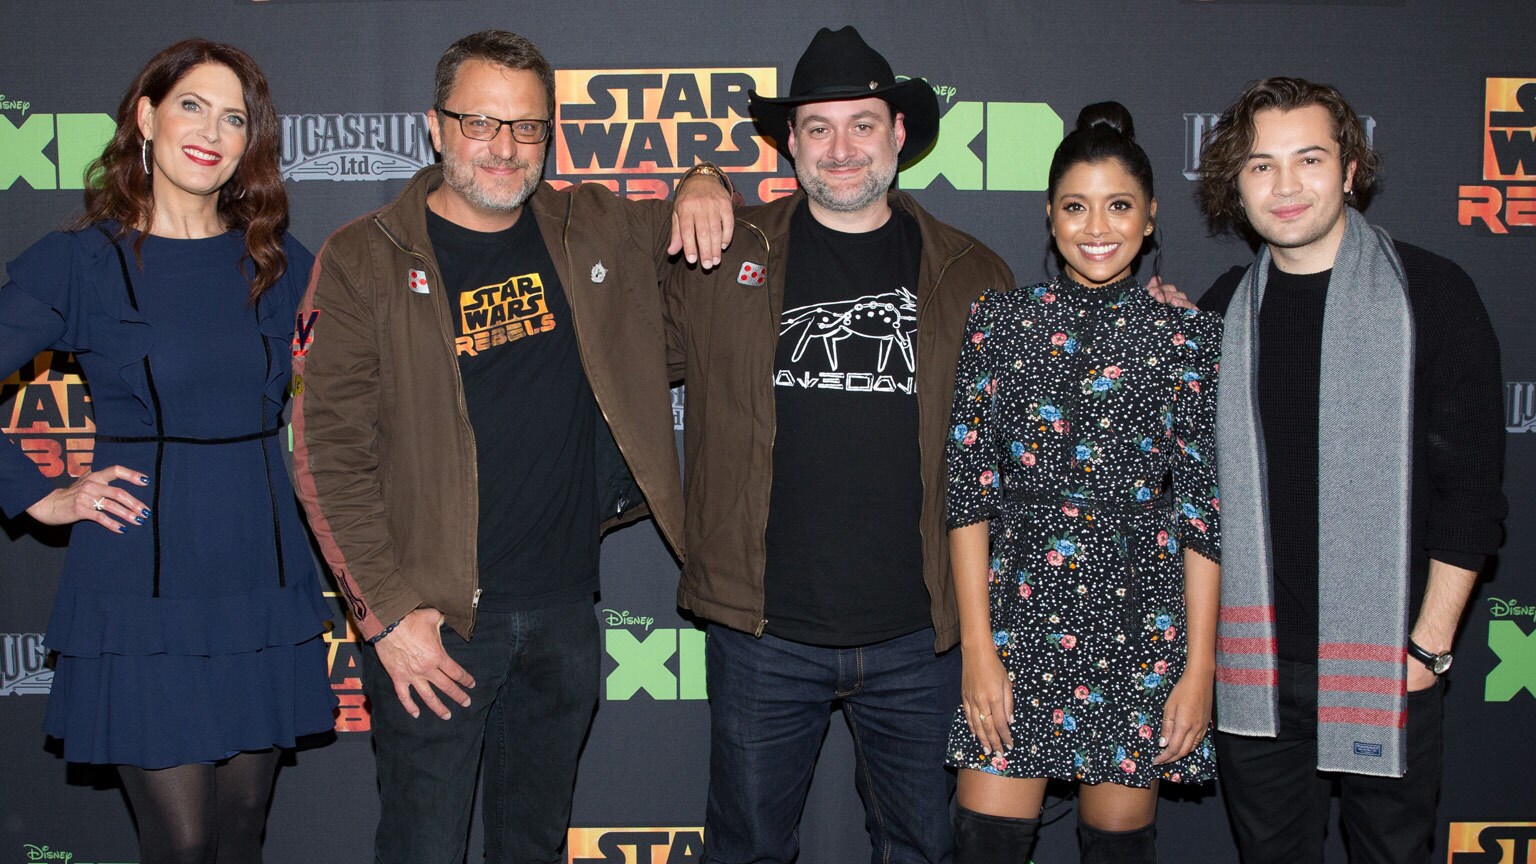 The Spark of Rebellion is Strong at Emotional Star Wars Rebels Finale Fan Screening